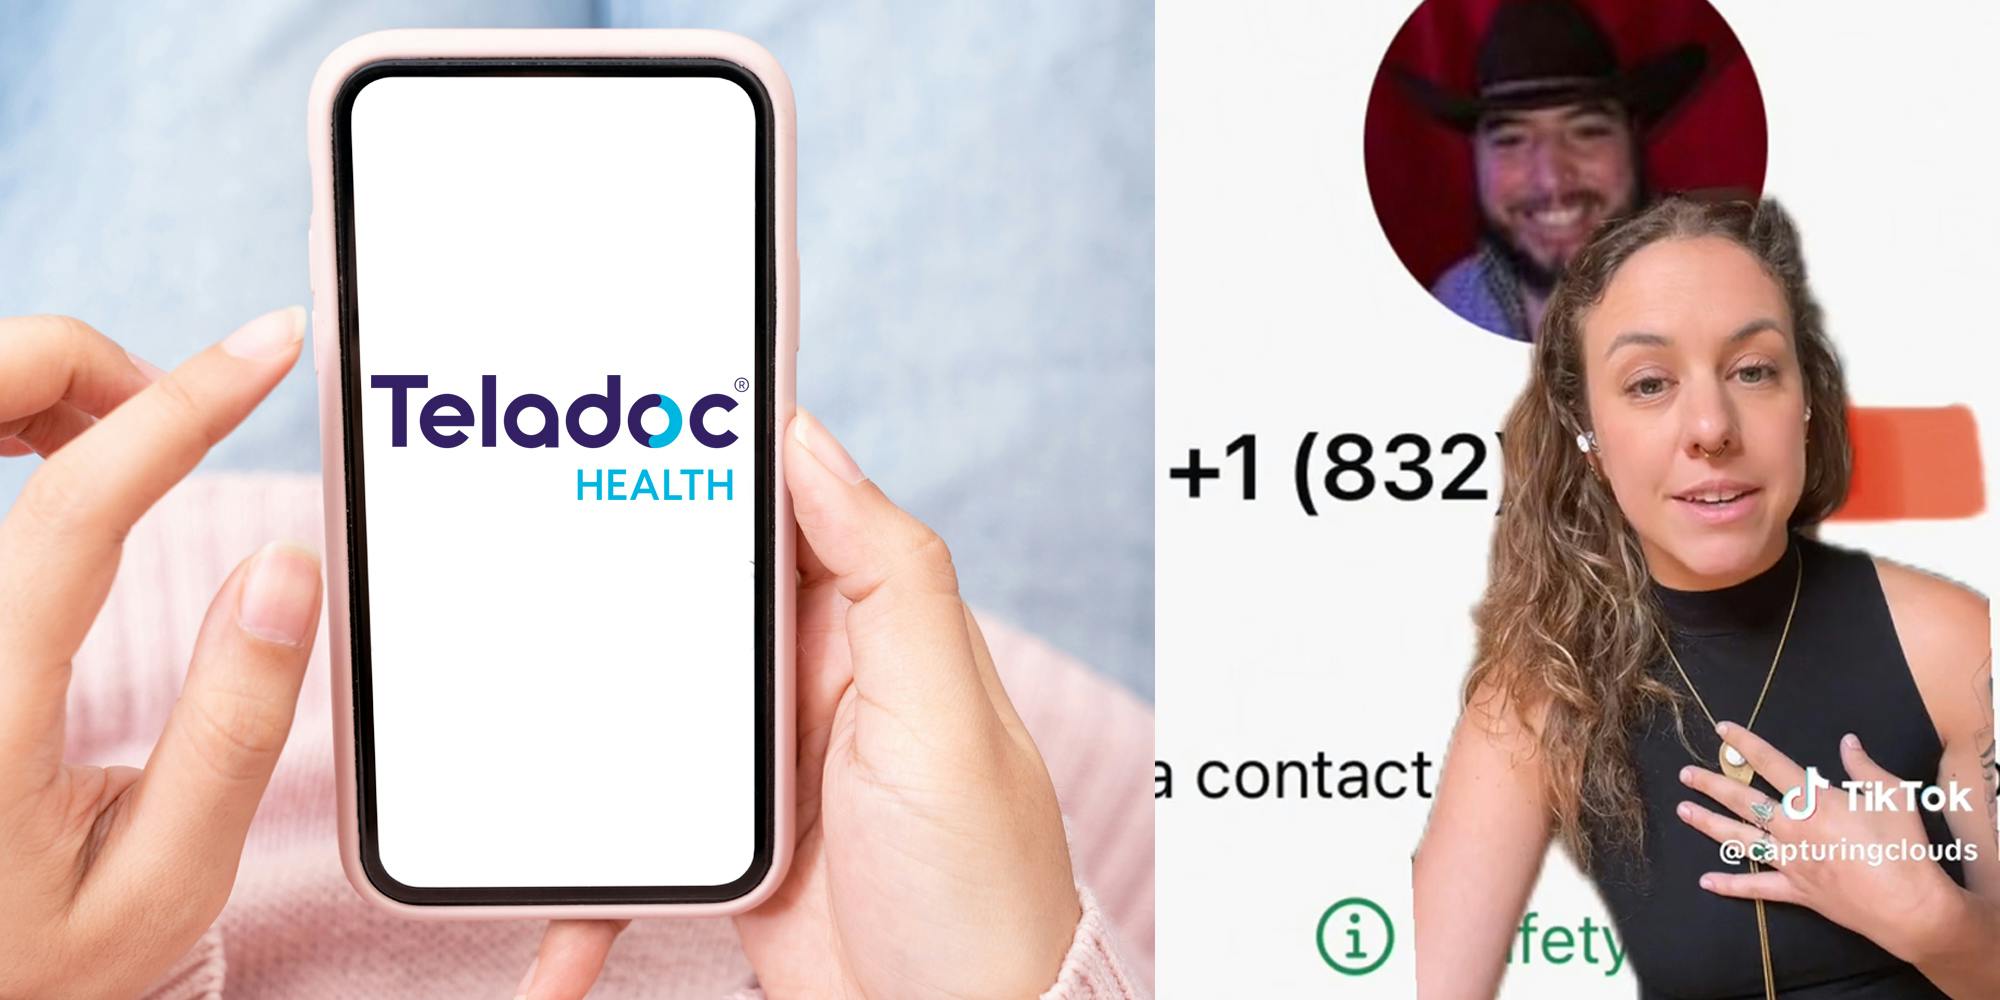 woman holding phone with "Teladoc health" logo (l) woman with phone contact in background of man in cowboy hat (r)